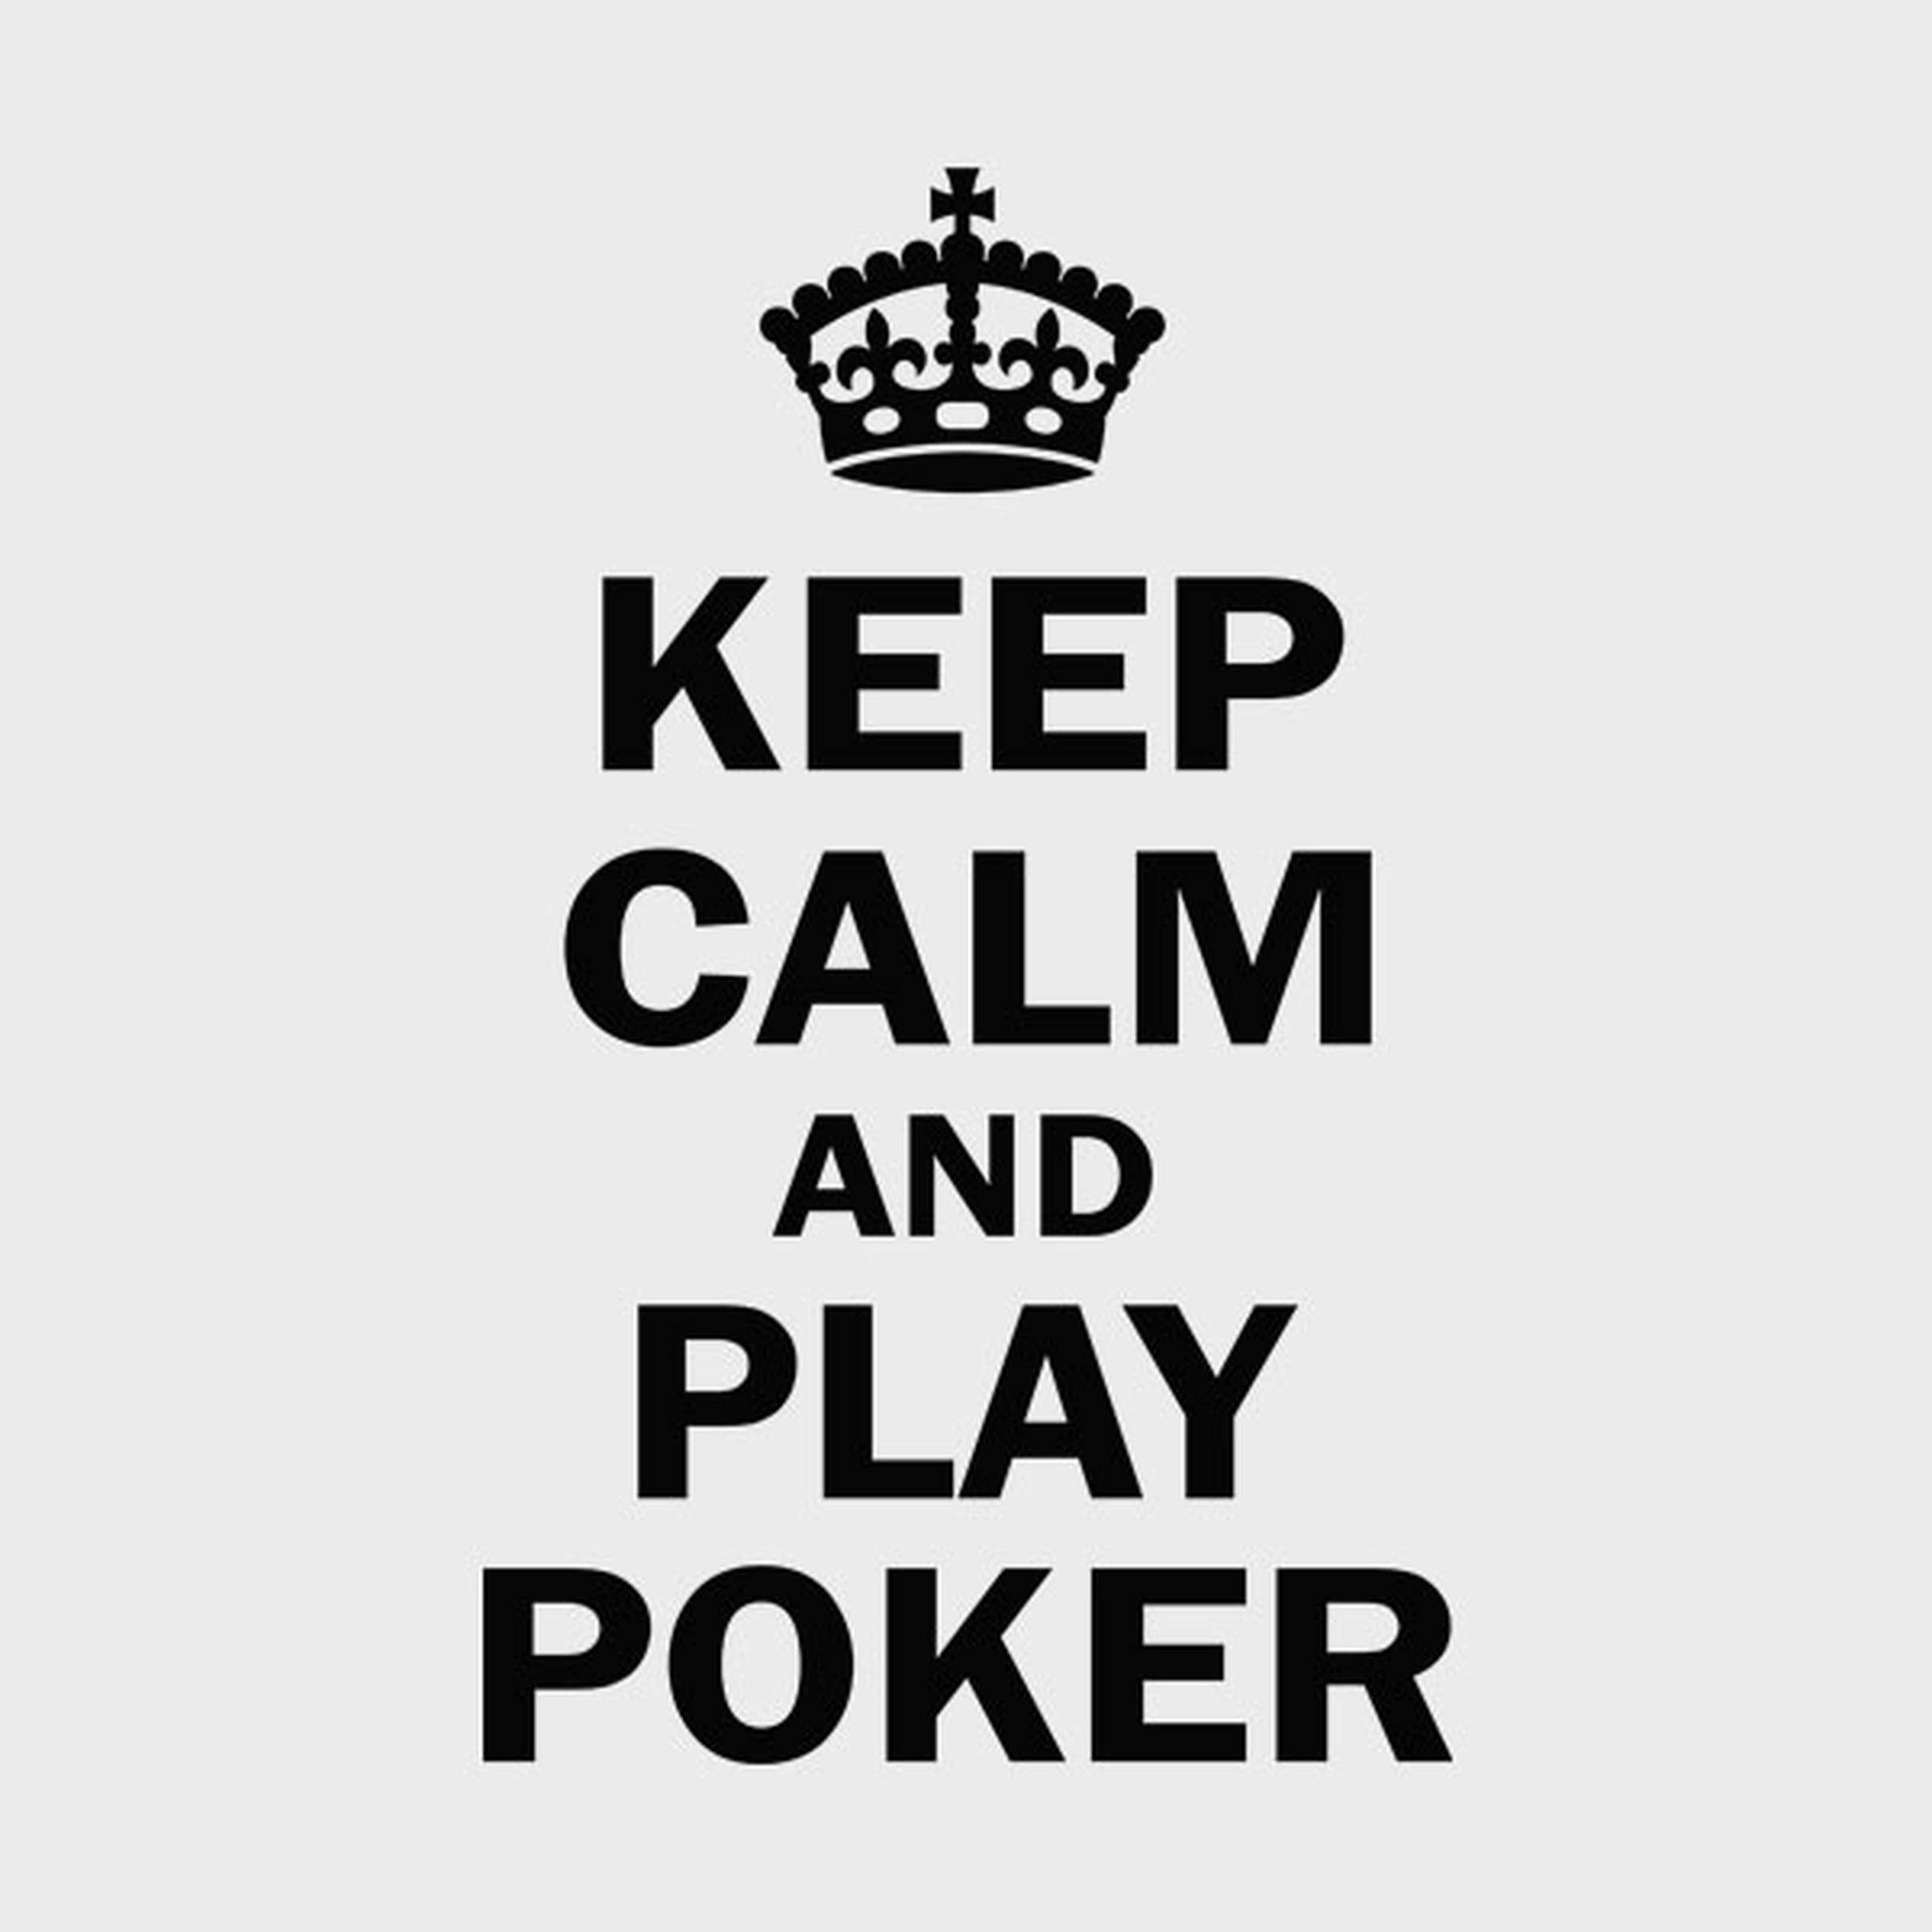 Keep calm and play poker - T-shirt